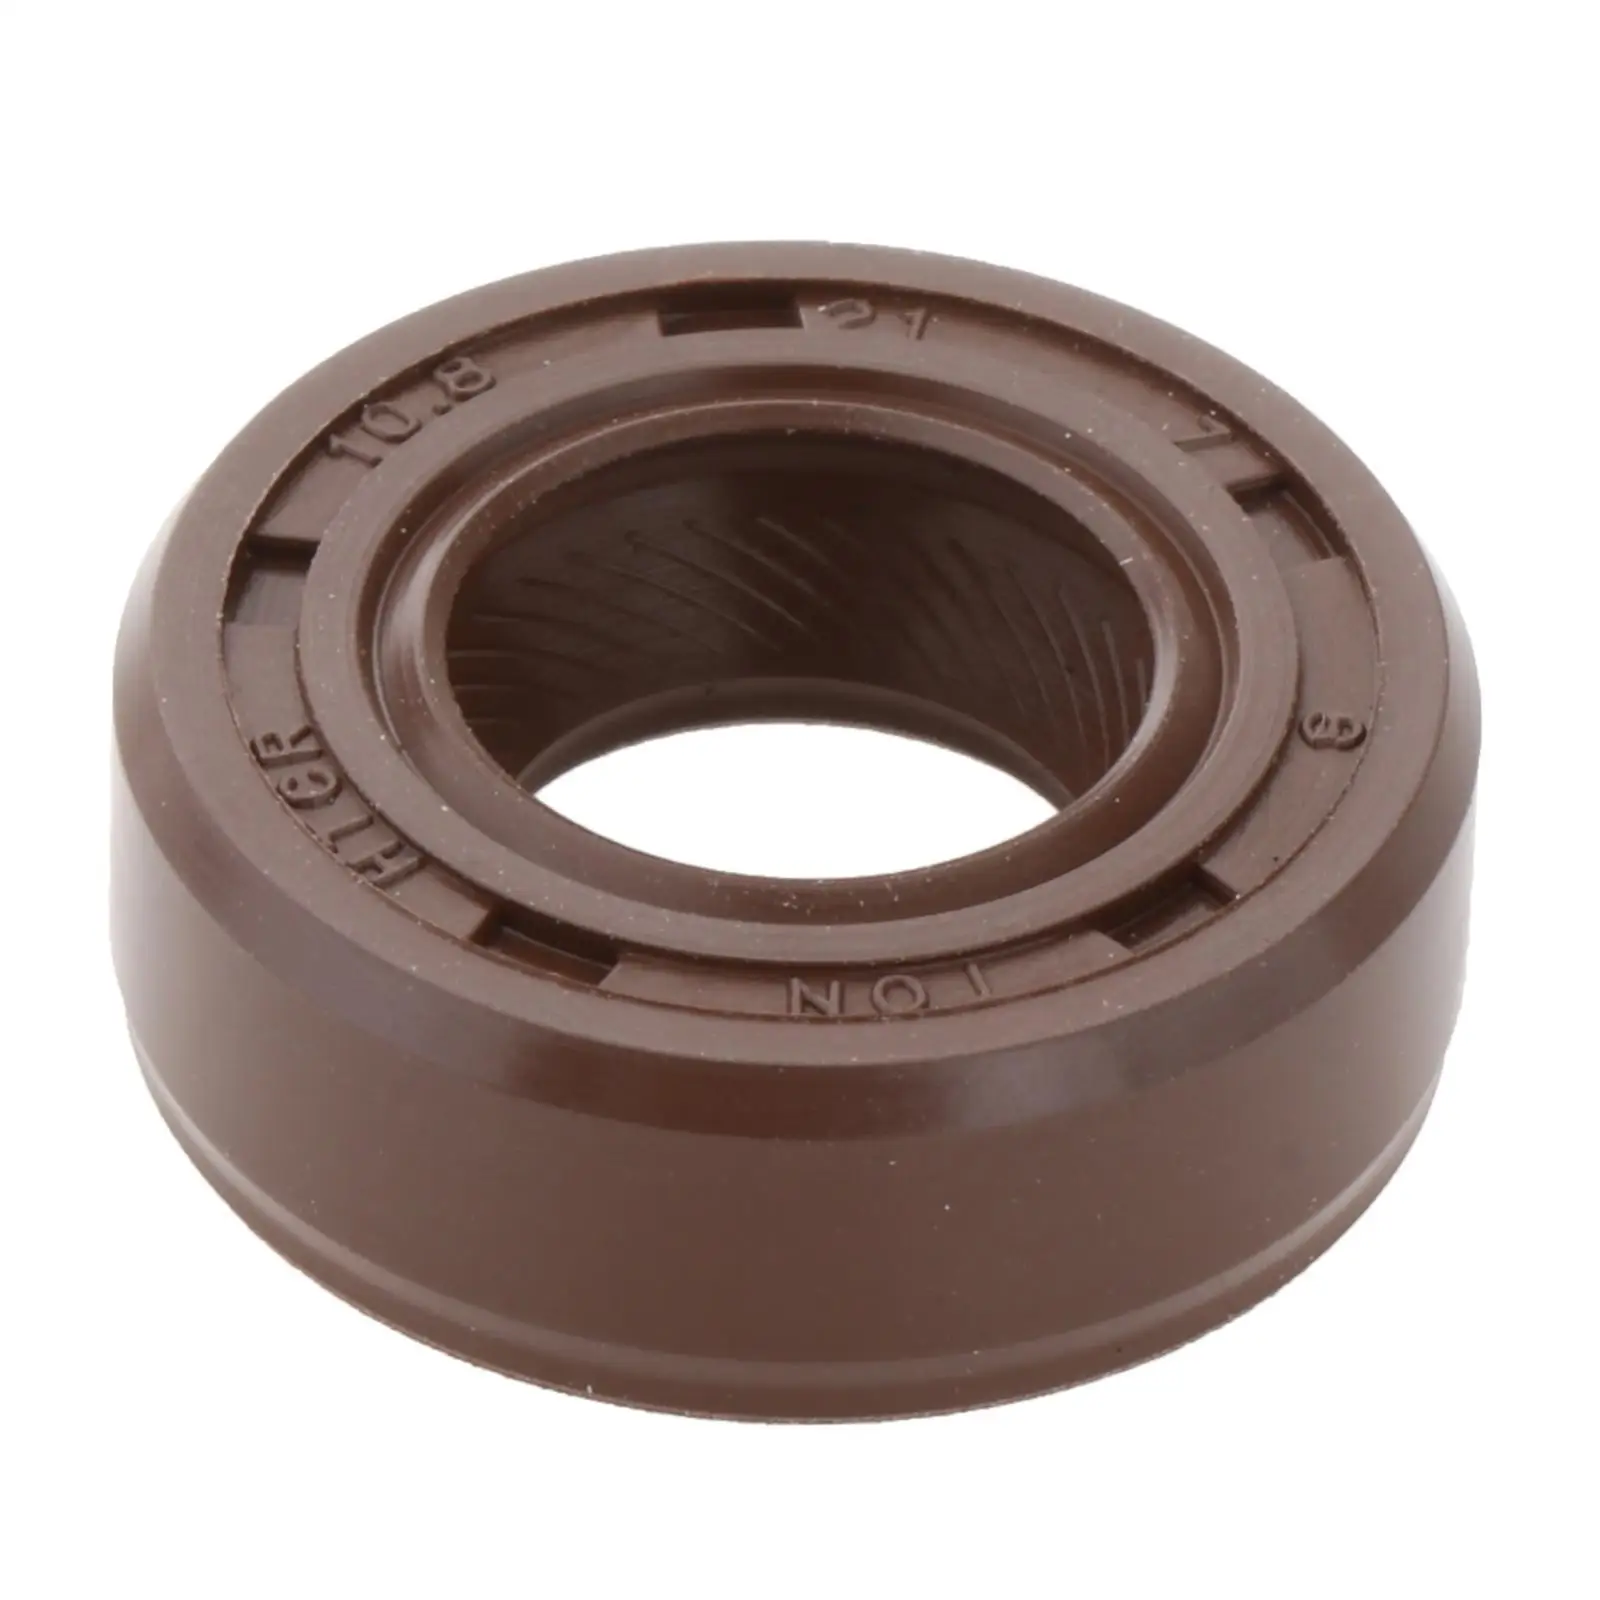 Oil Seal Fit for Outboard 2T 4HP 5HP High Performance Accessories